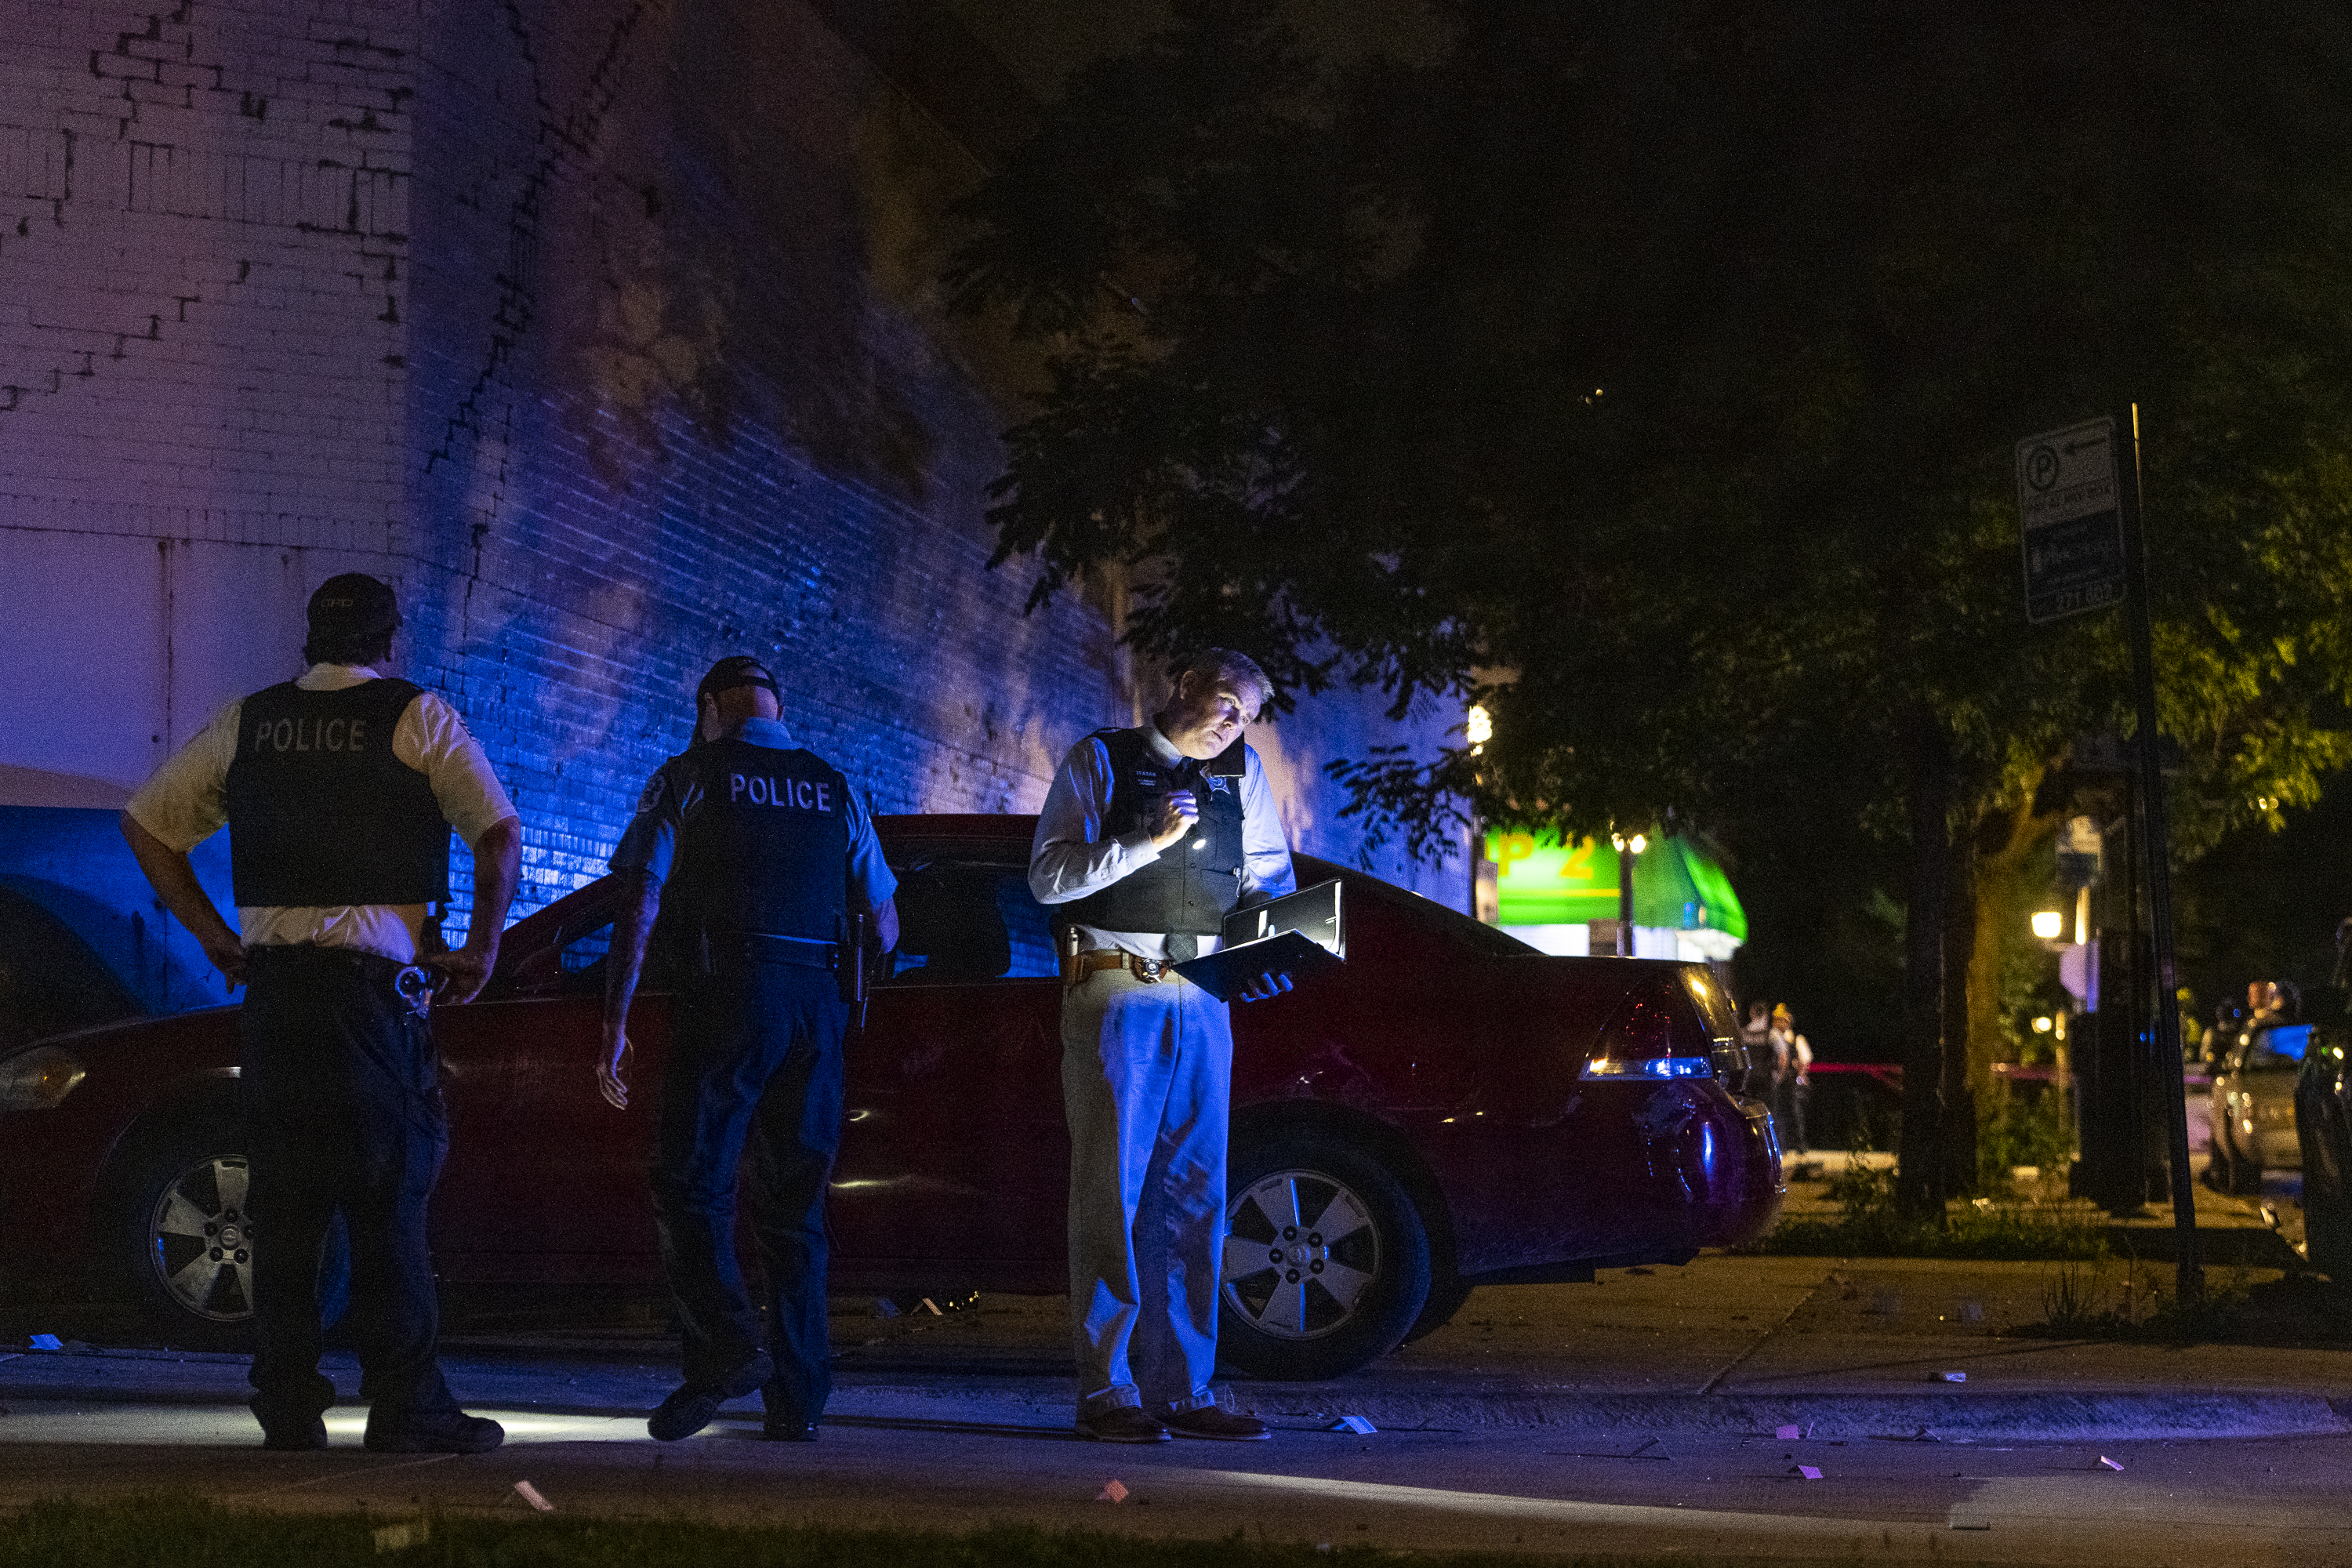 Chicago police work the scene where at least eight people were shot in the 6300 block of South Artesian Avenue in the Marquette Park neighborhood on Sunday, June 27, 2021.